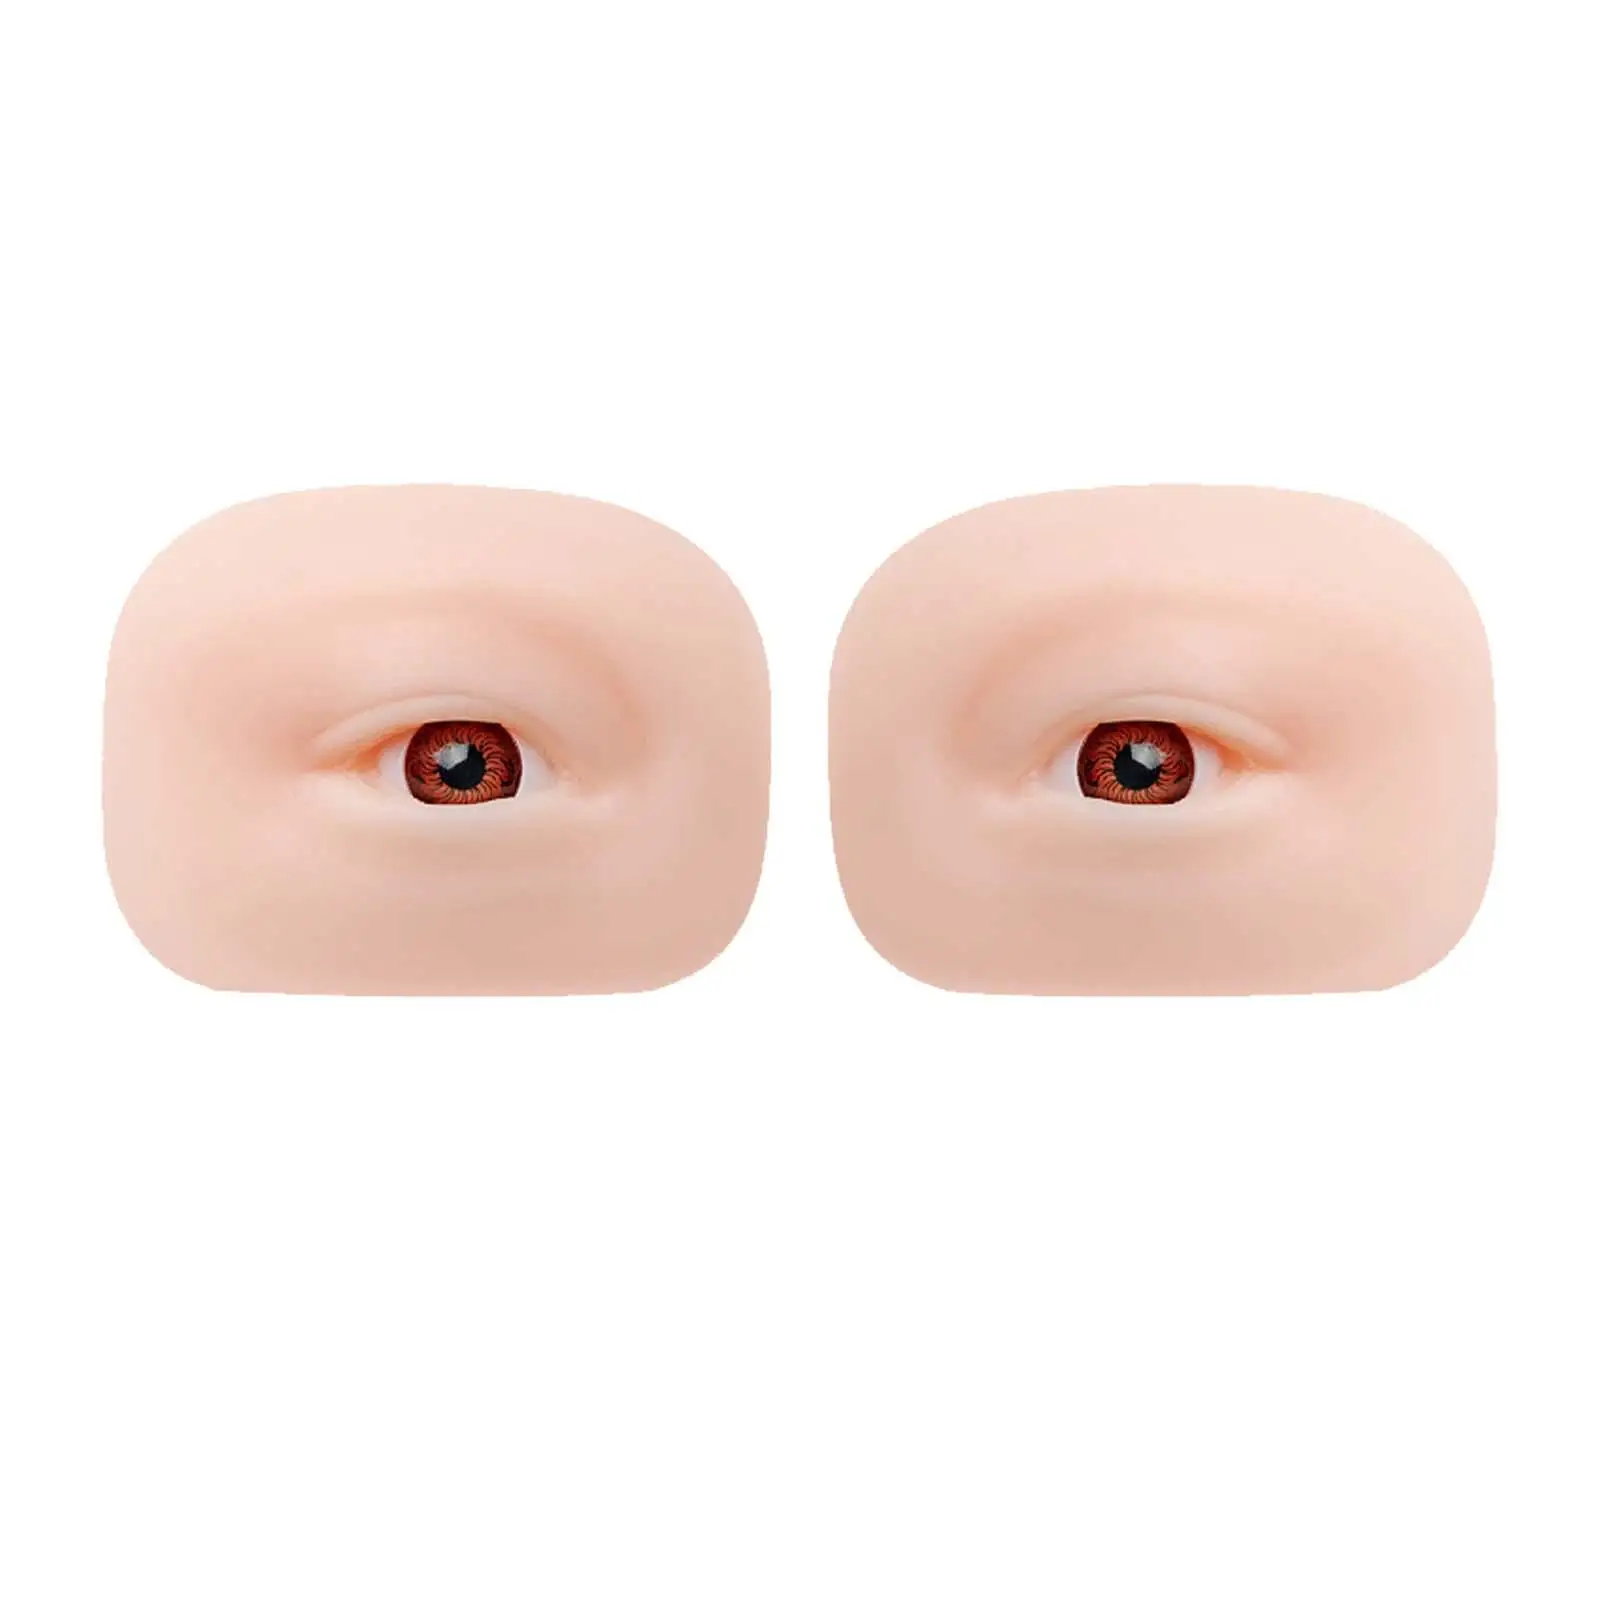 5D Silicone Eye Model Convenient Durable Makeup Mannequin Face Resuable for Beginners Makeup Training Beauticians Home Use